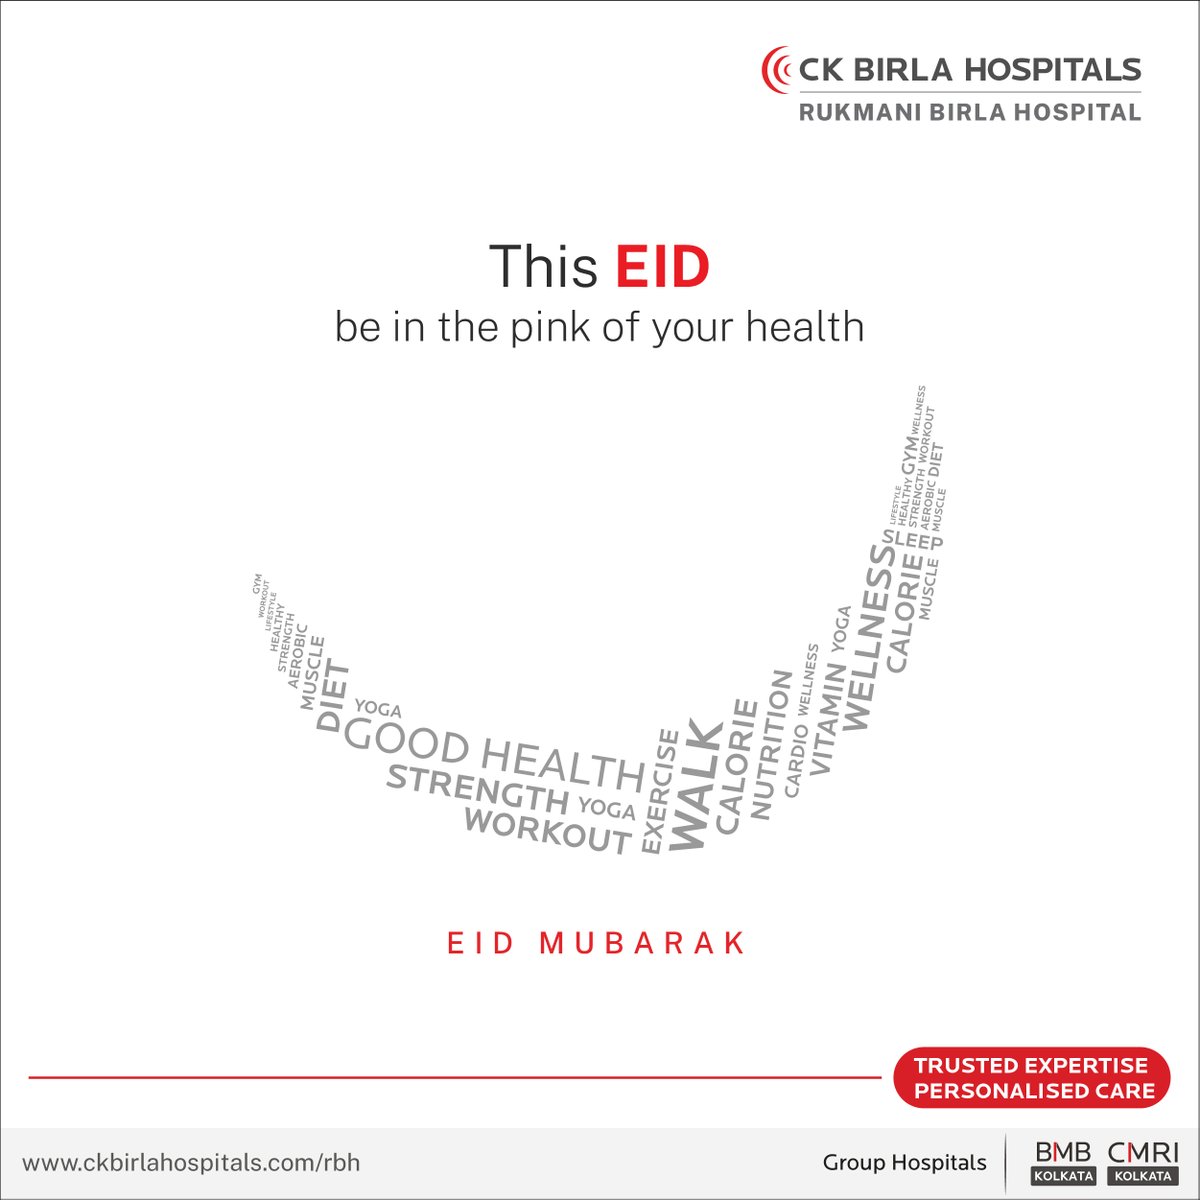 This Eid, prioritize your health and well-being. Let's celebrate good health and happiness. Remember, staying healthy is the best gift you can give yourself and your loved ones. Eid Mubarak!

#RBHJaipur #EidMubarak #HealthyEid #WellnessCelebration #StayHealthy